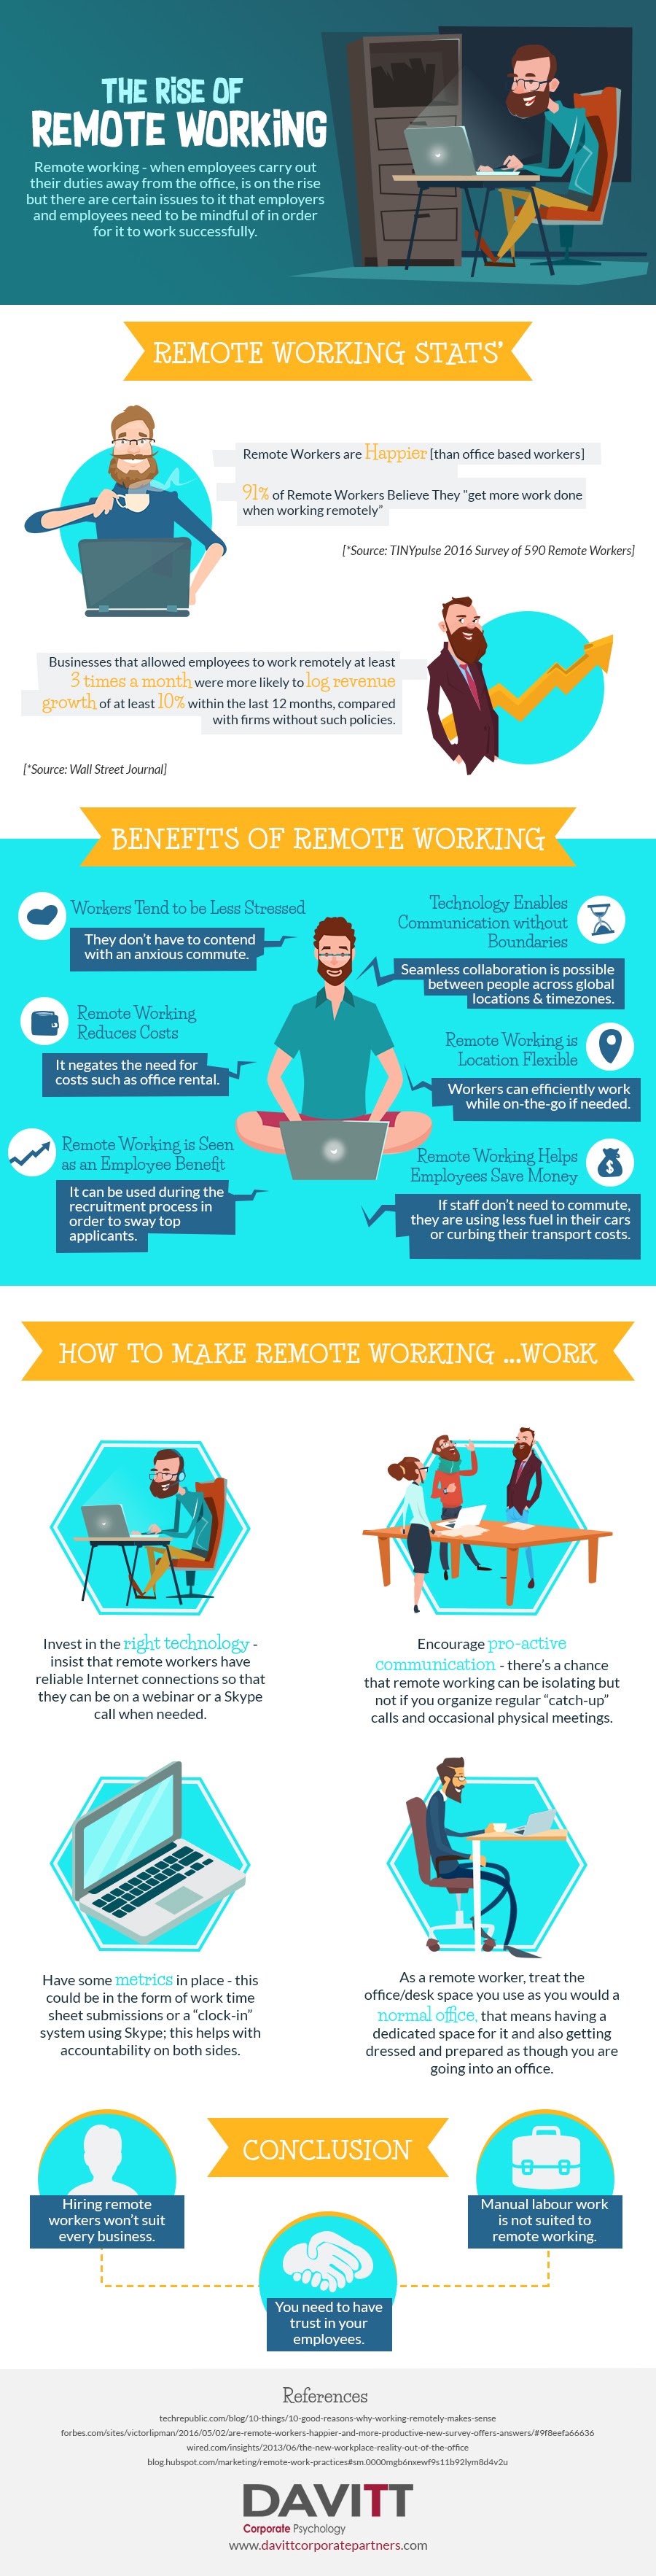 The Rise of Remote Working